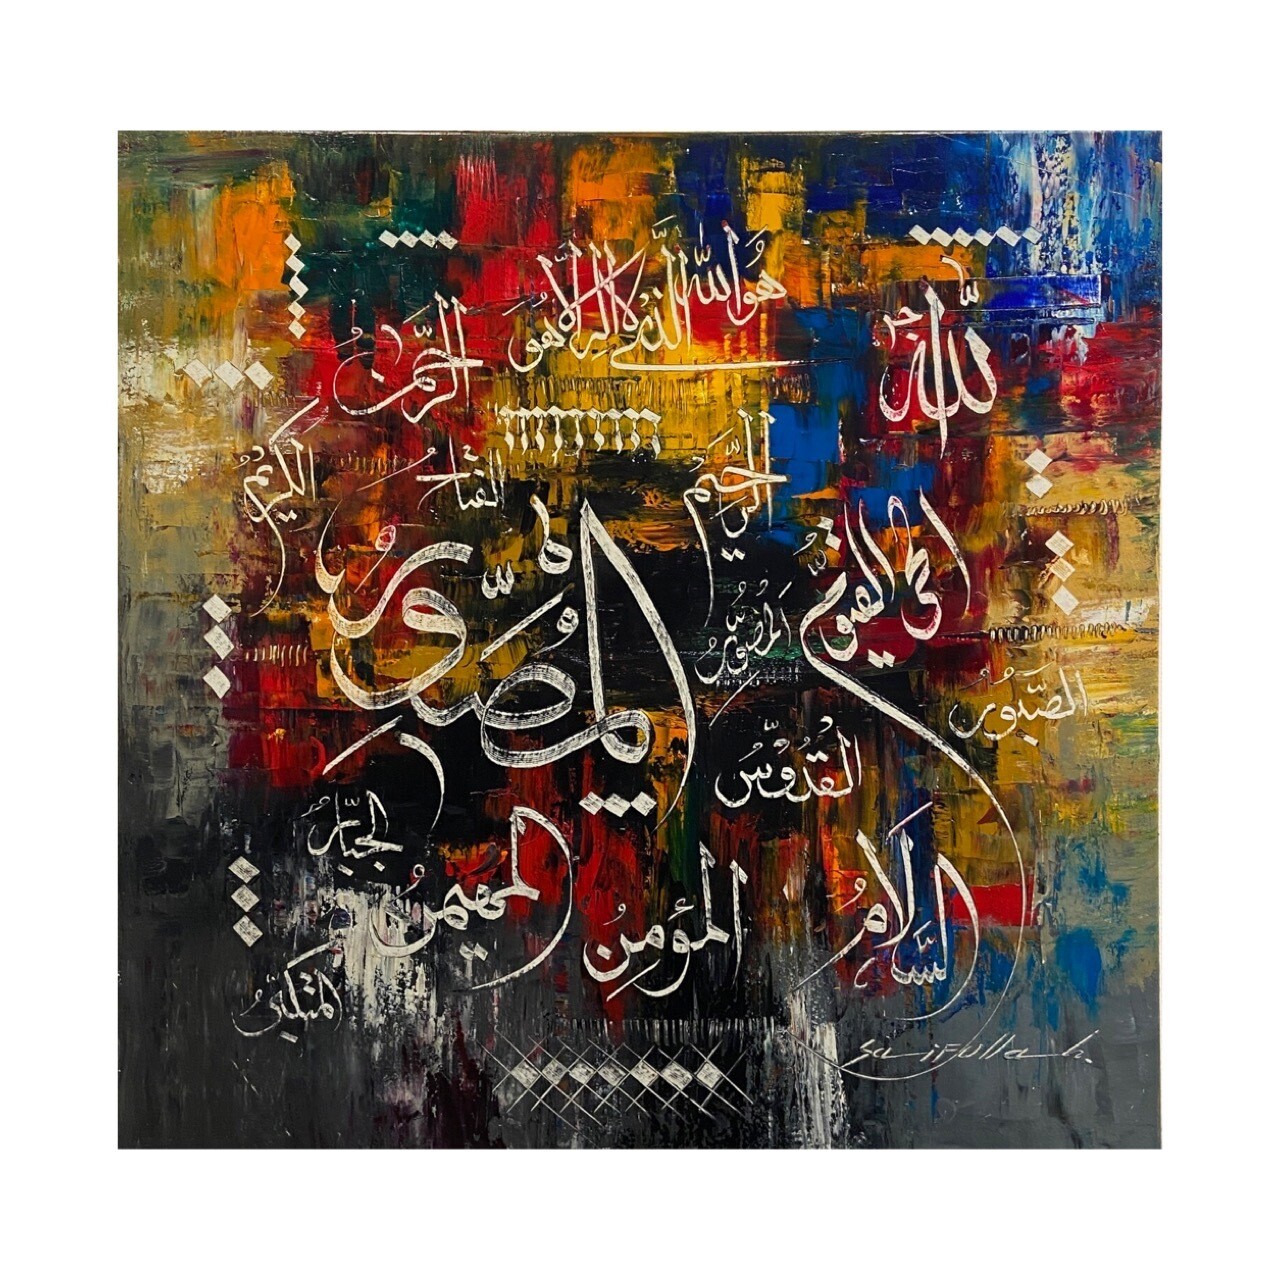 Allah’s Names - Original hand engraved knife calligraphy painting